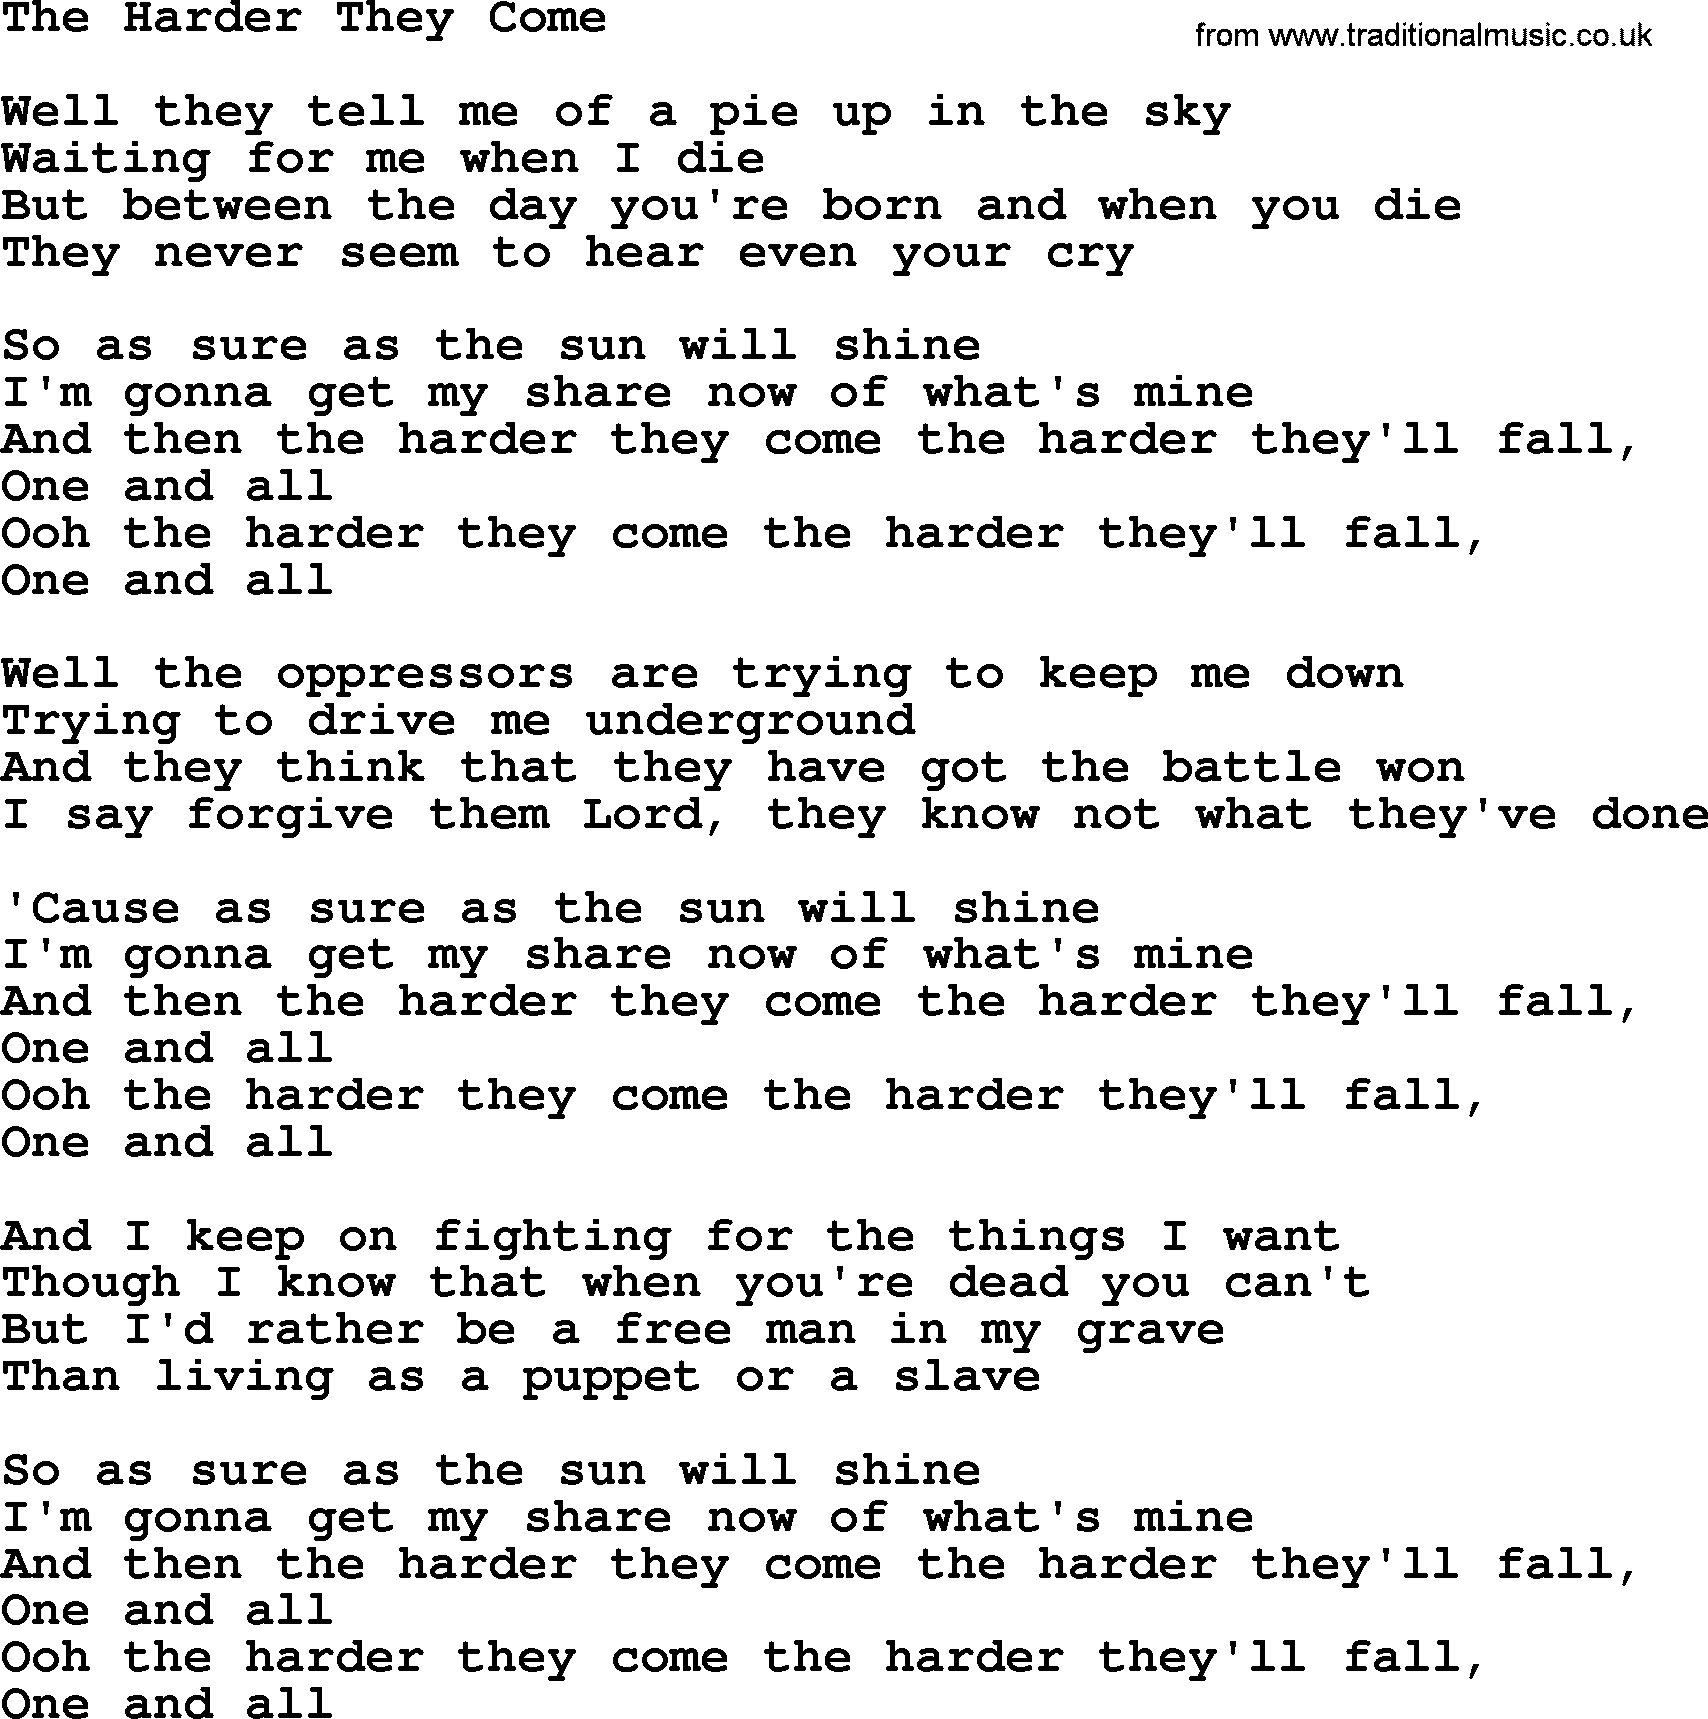 Willie Nelson song: The Harder They Come lyrics